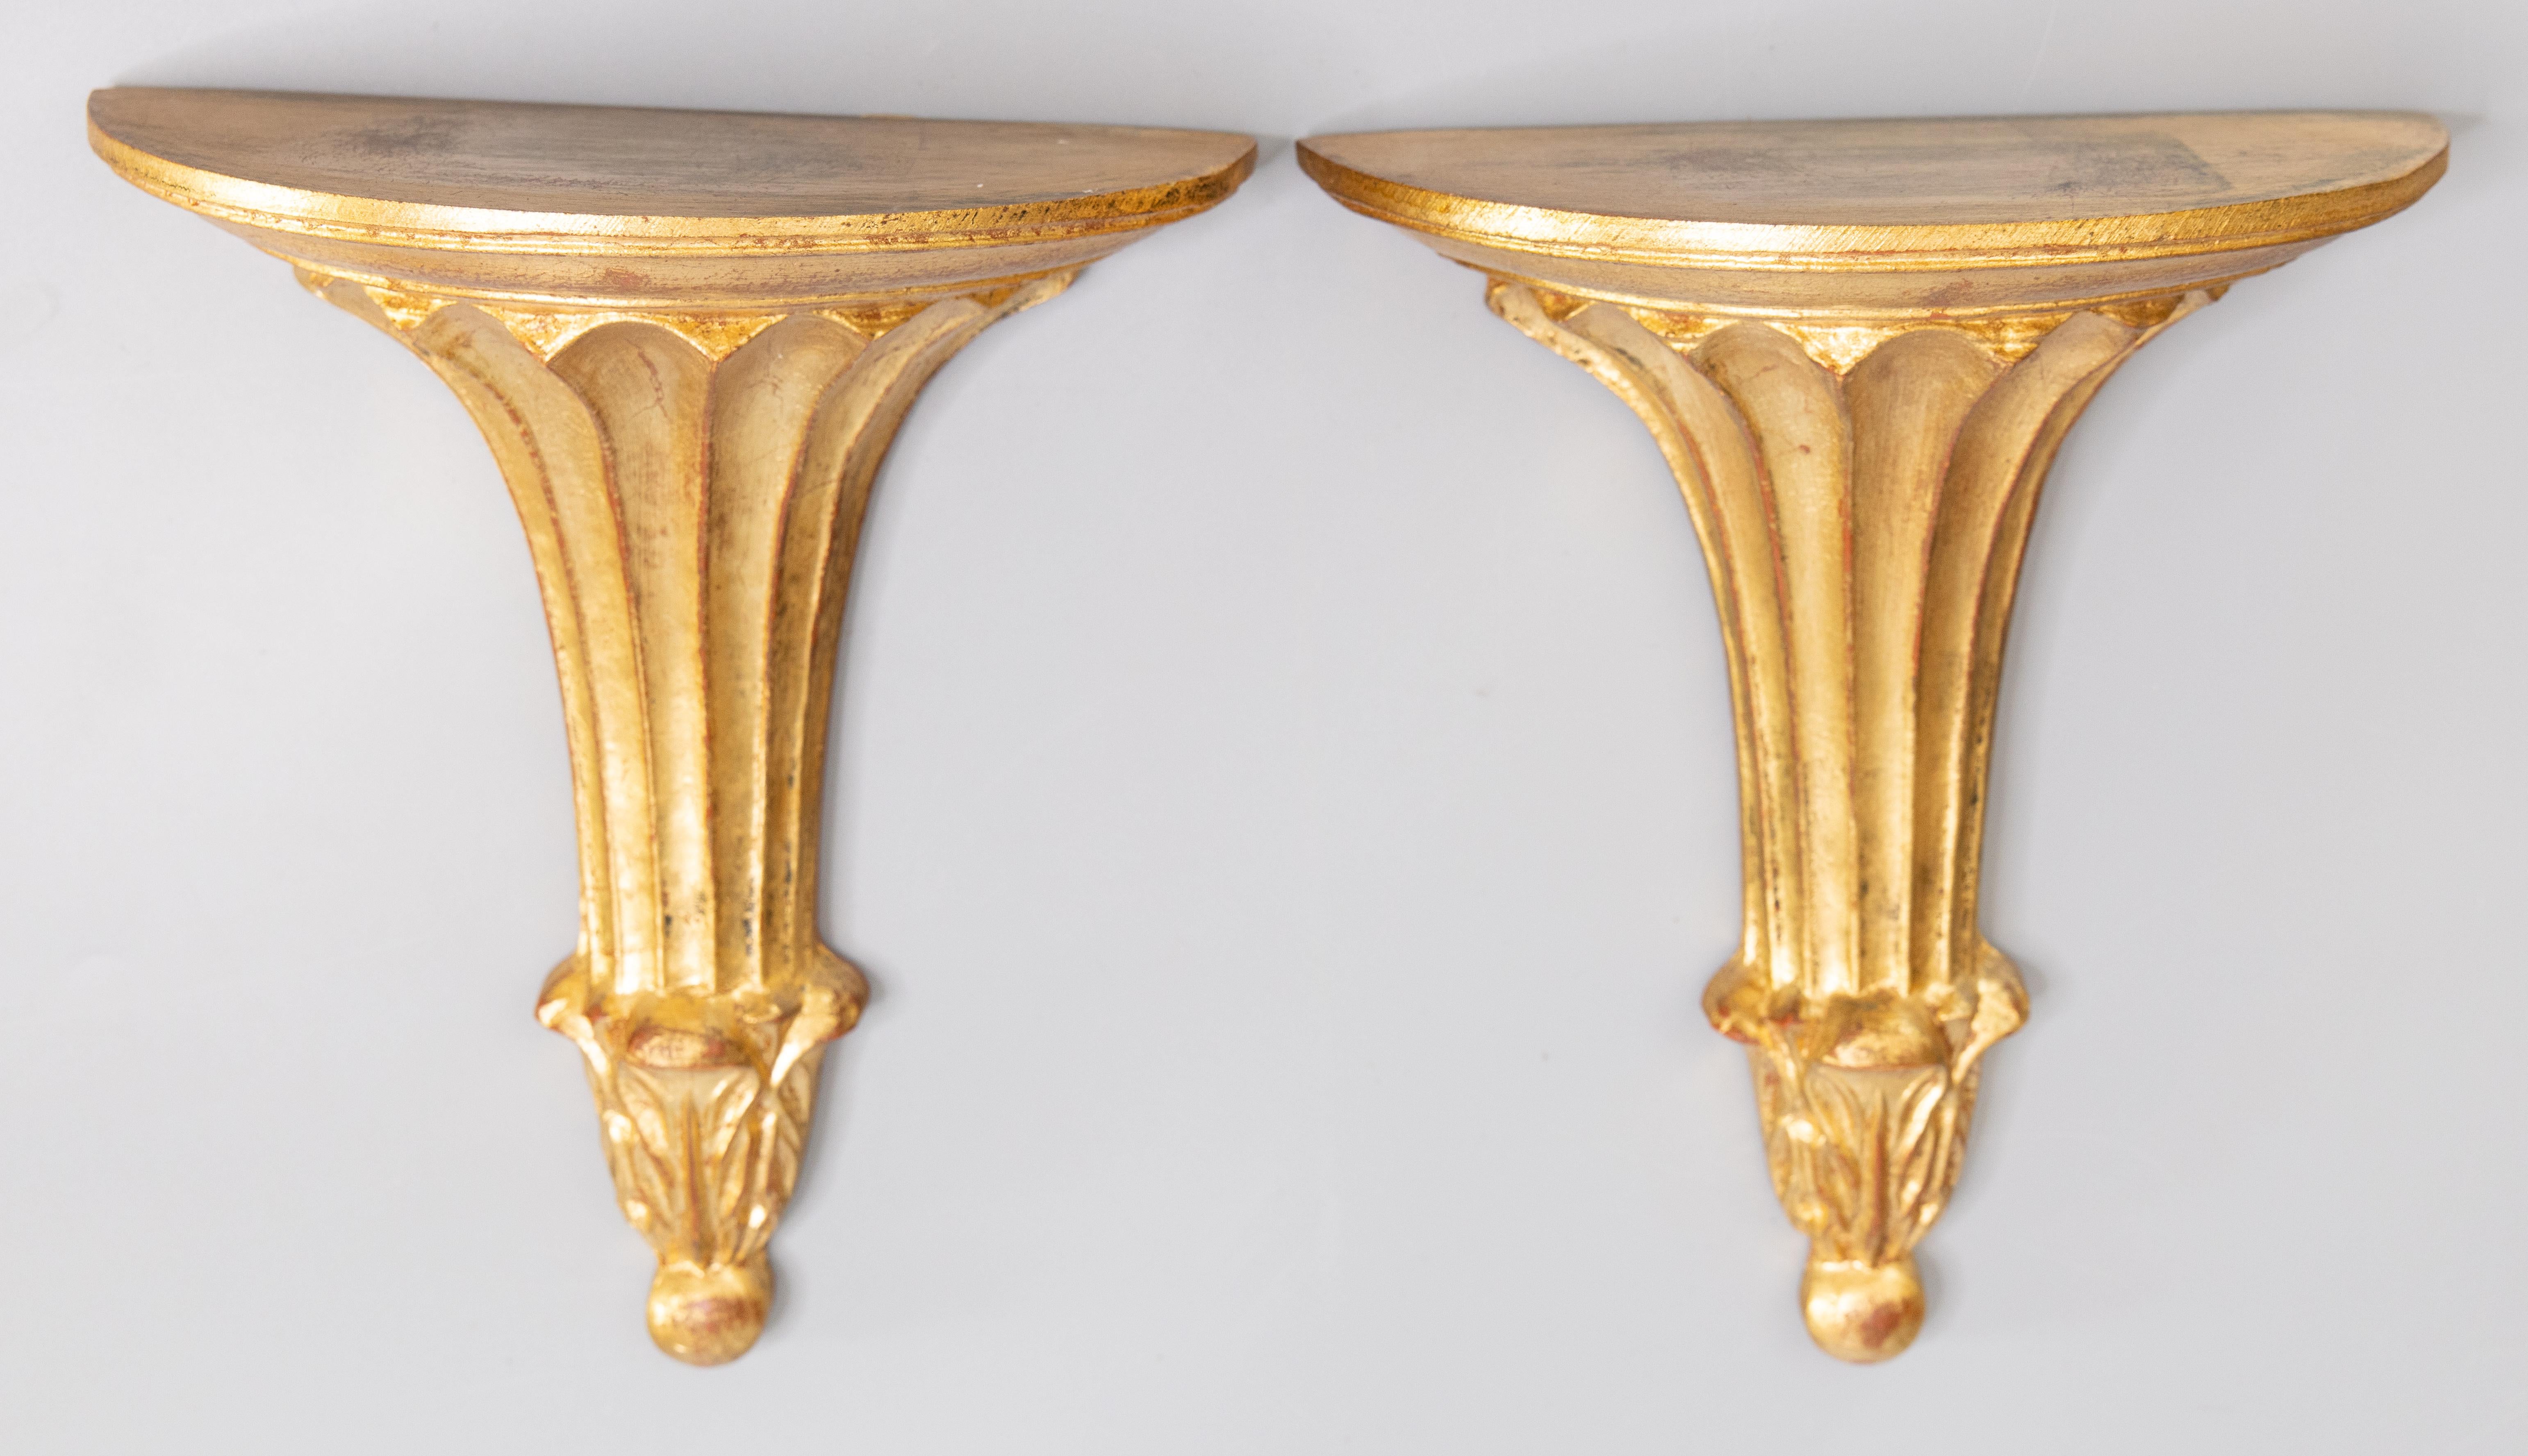 A stunning pair of vintage midcentury Neoclassical style Italian Florentine gilded wood wall brackets or shelves. Florentia label and impressed maker's mark 